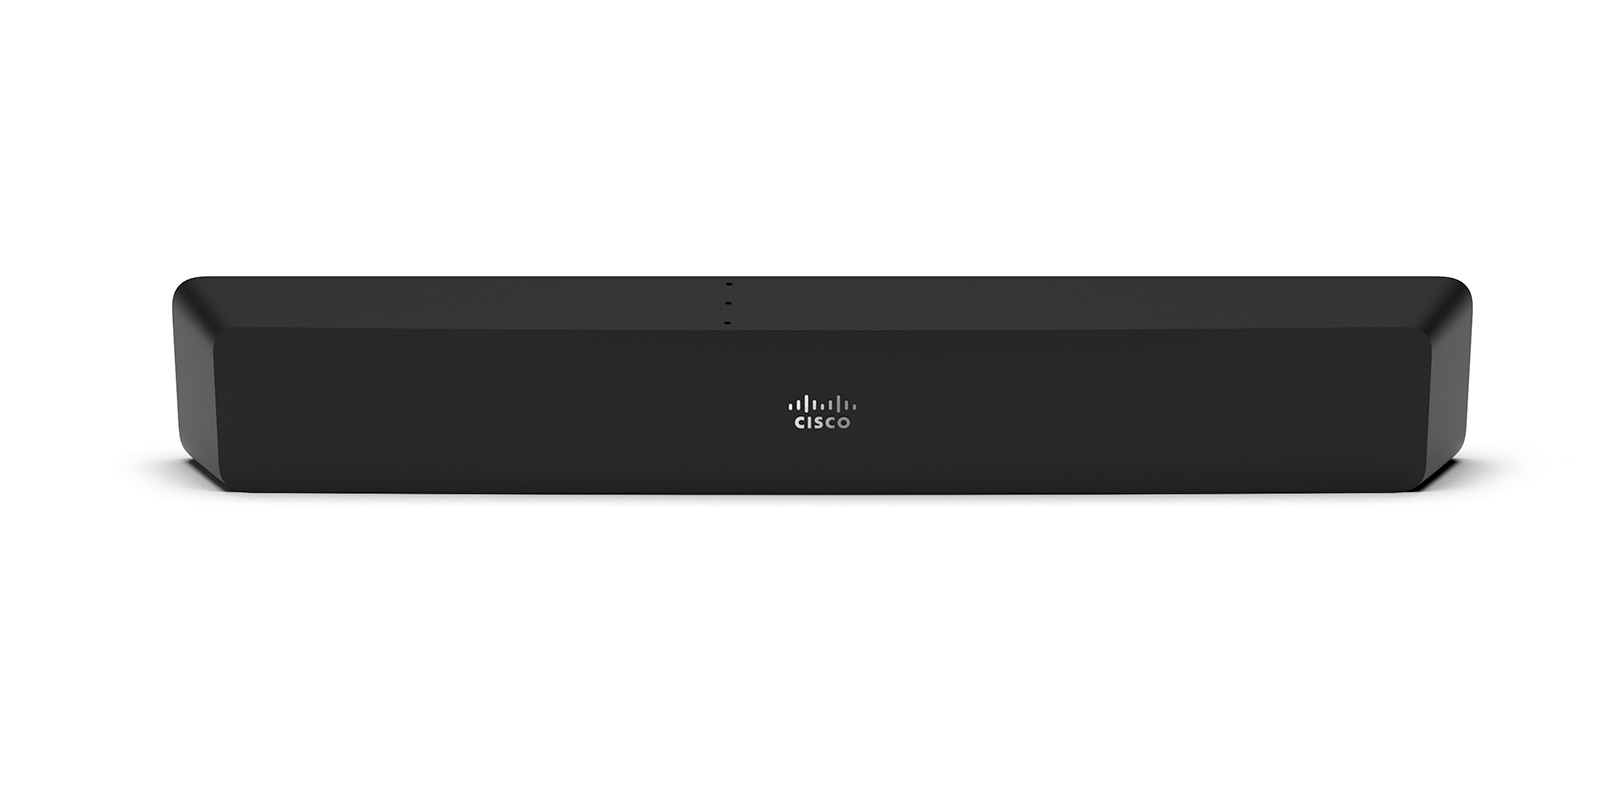 Cisco Room Bar shown from the front with the video bar camera visible at the center of the collaboration device